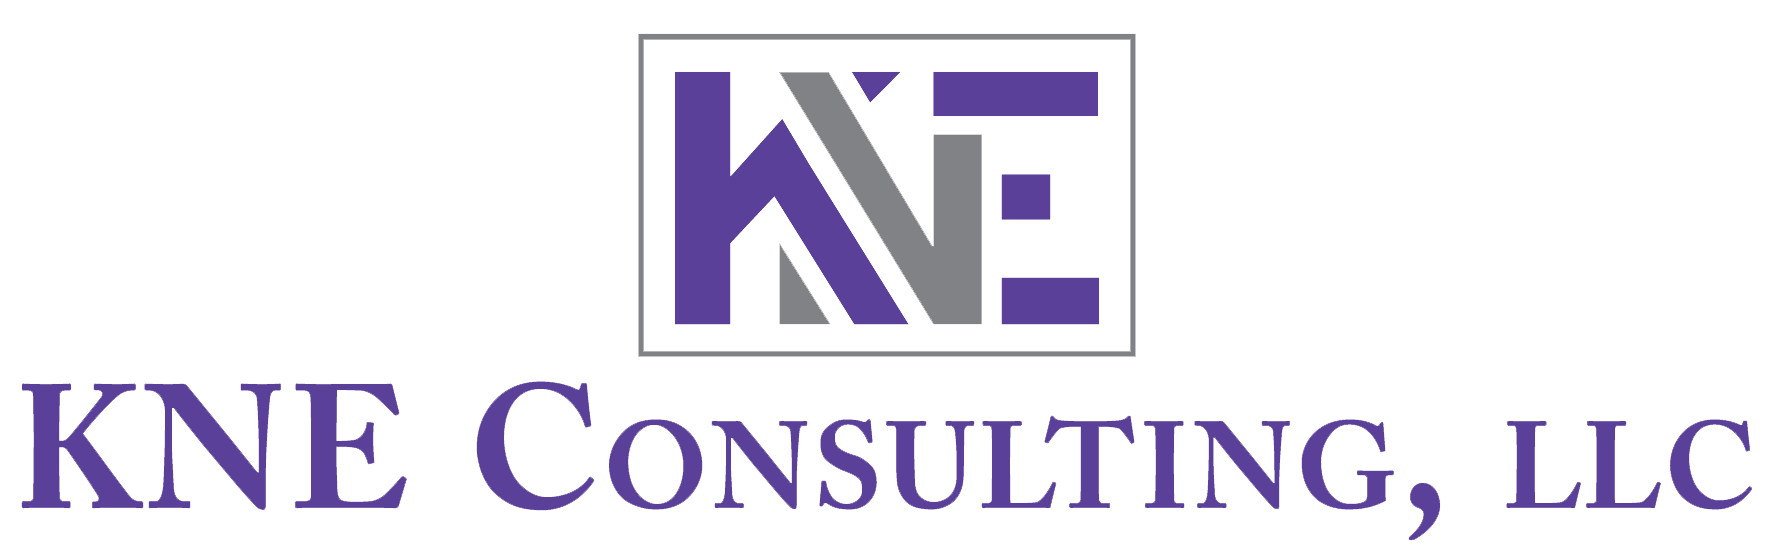 KNE Consulting